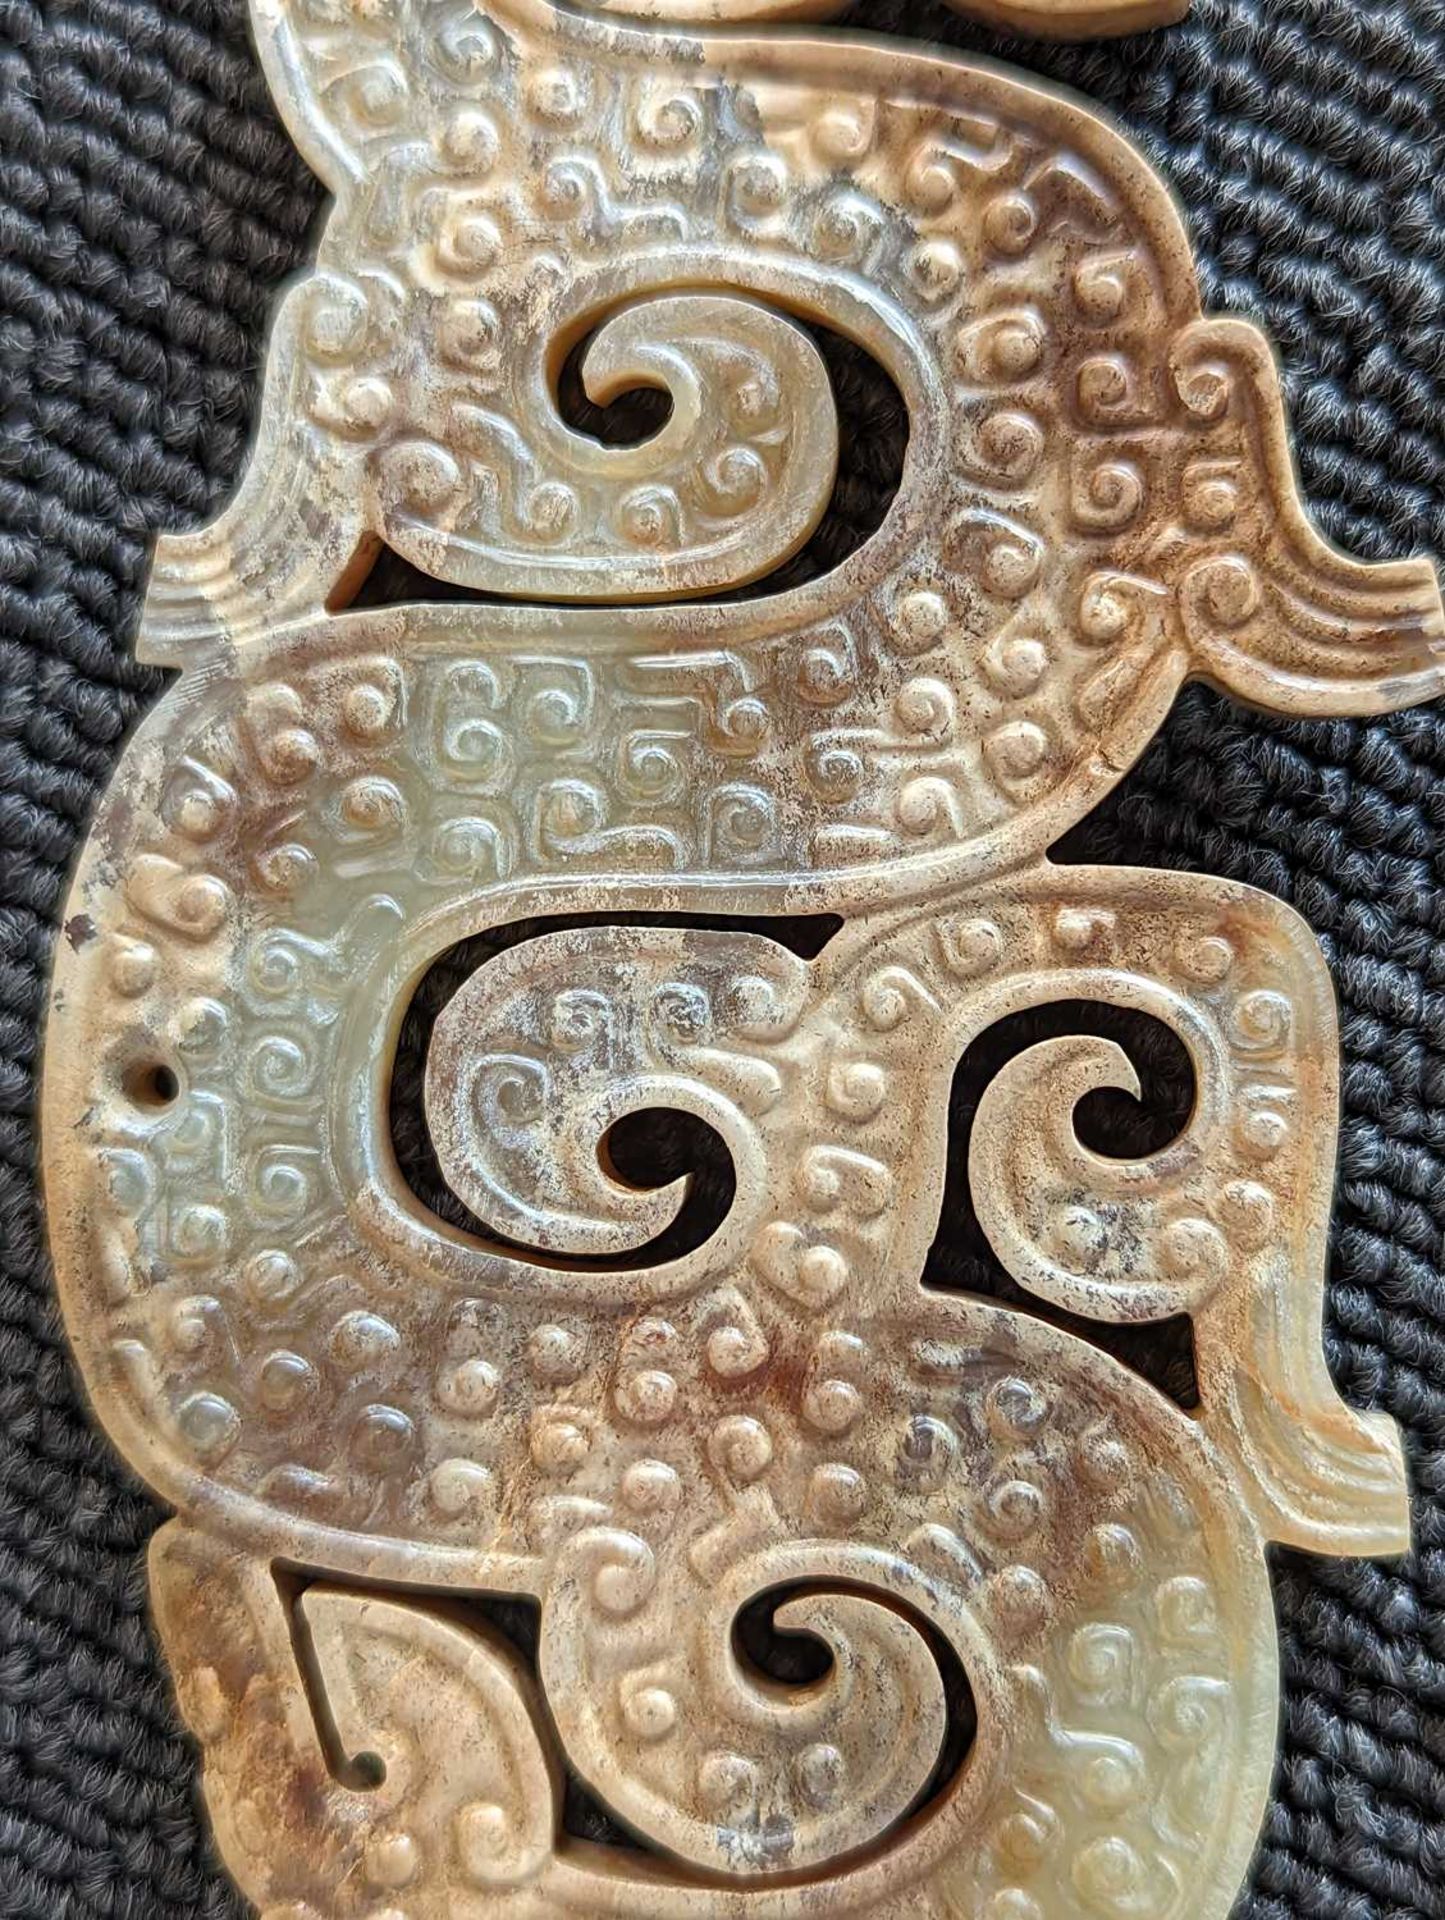 DRAGON-SHAPED PENDANT WITH CIRRUS CLOUD STRIPES - Image 8 of 25